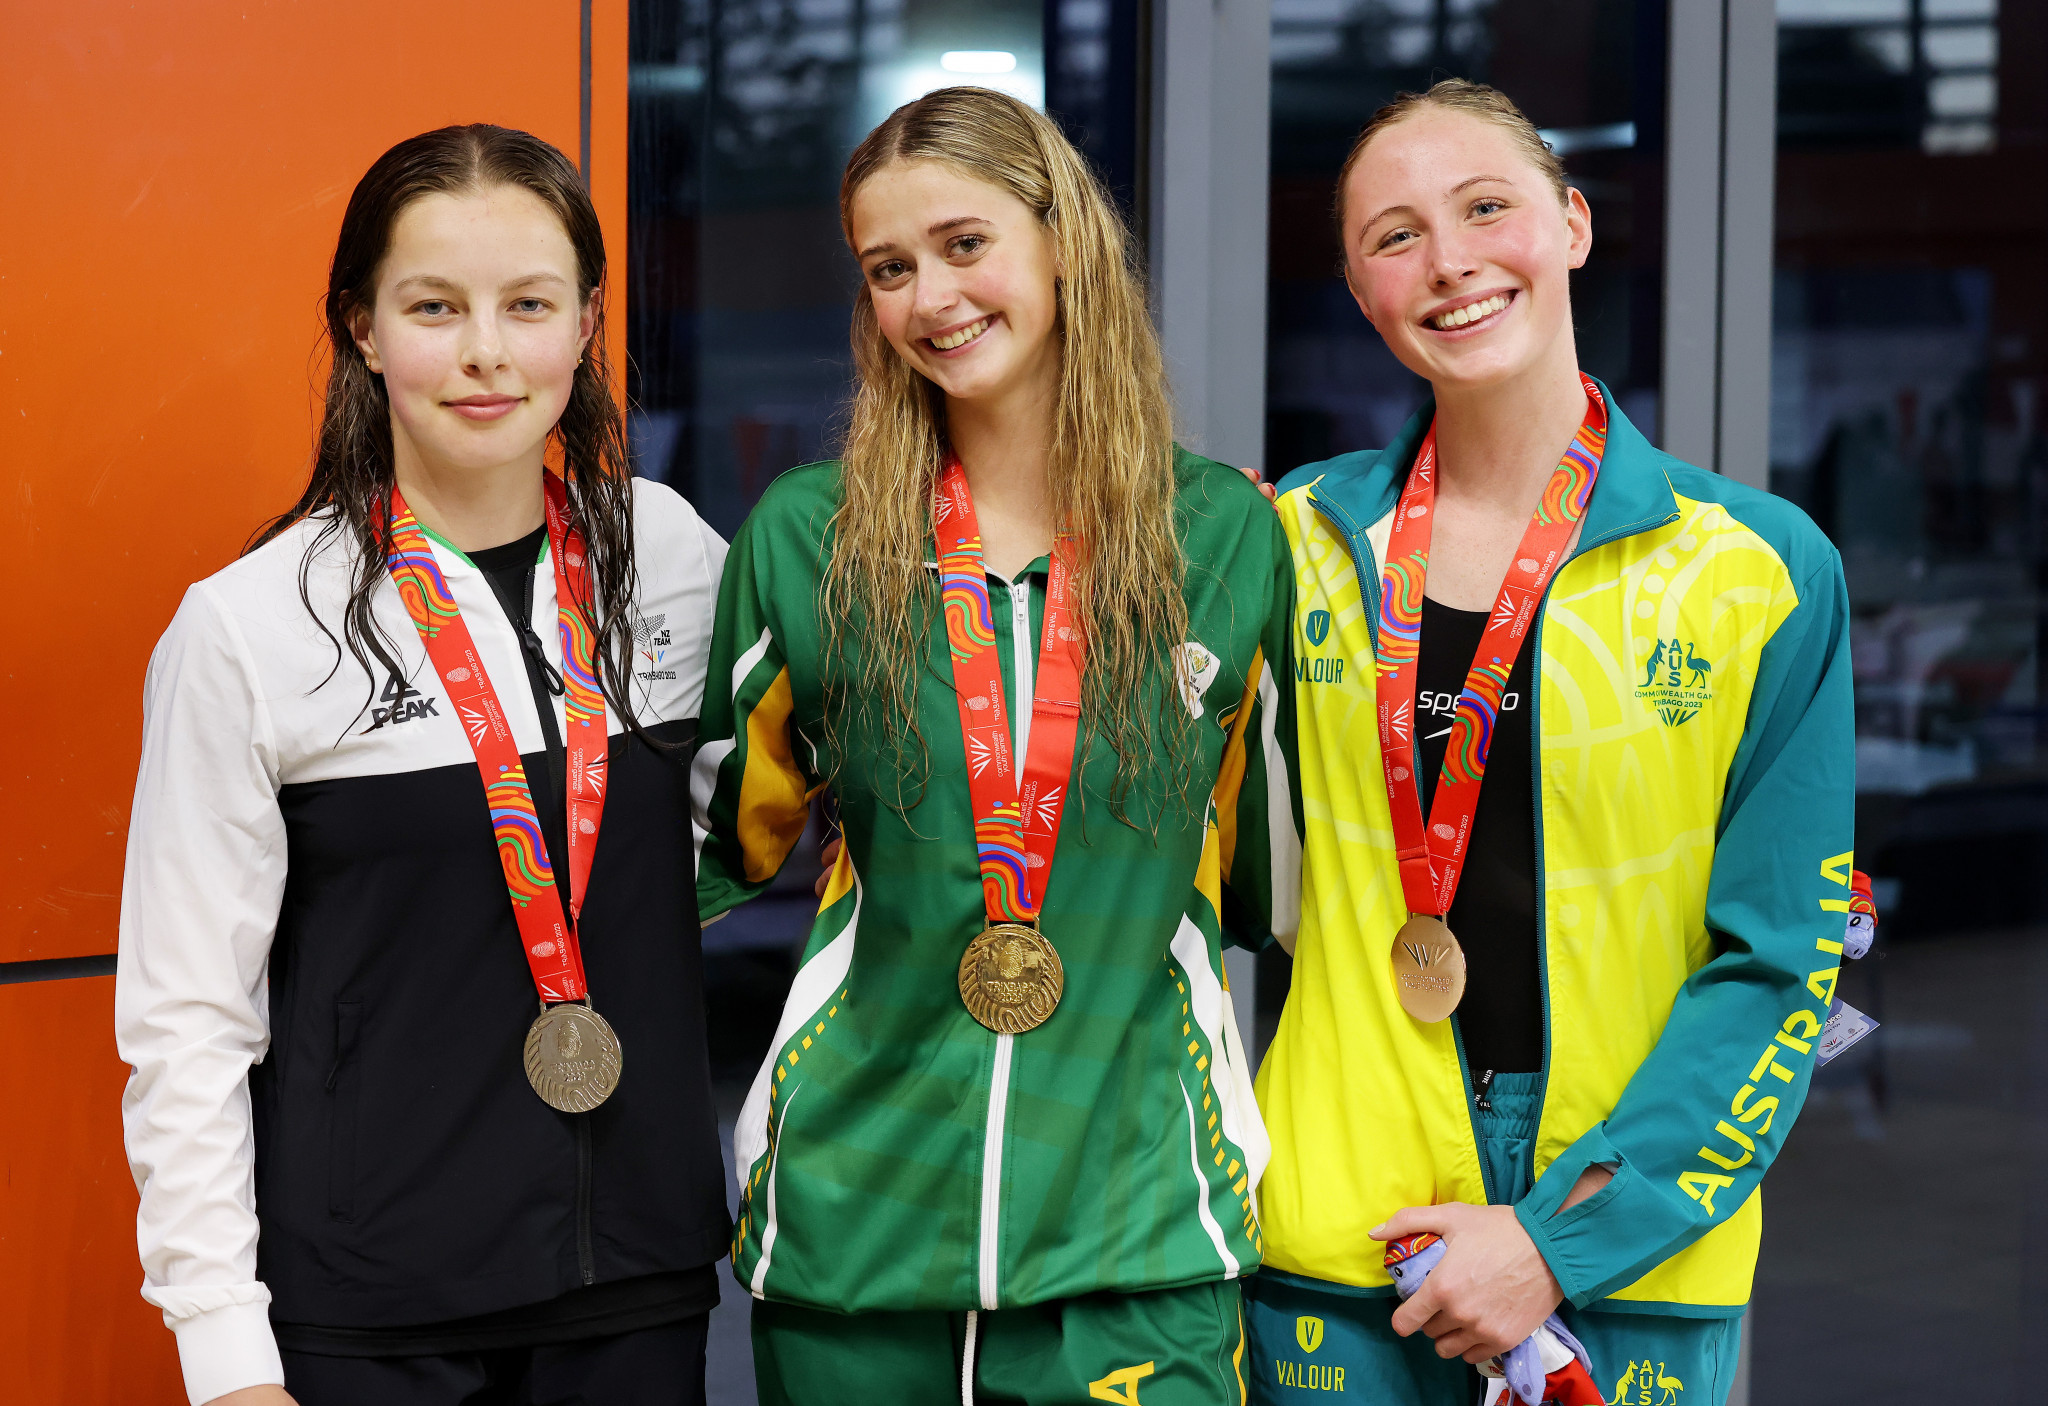 South Africa's Jessica Thompson, centre, won the women's 50m butterfly final in a Commonwealth Youth Games record of 26.84sec ©Getty Images